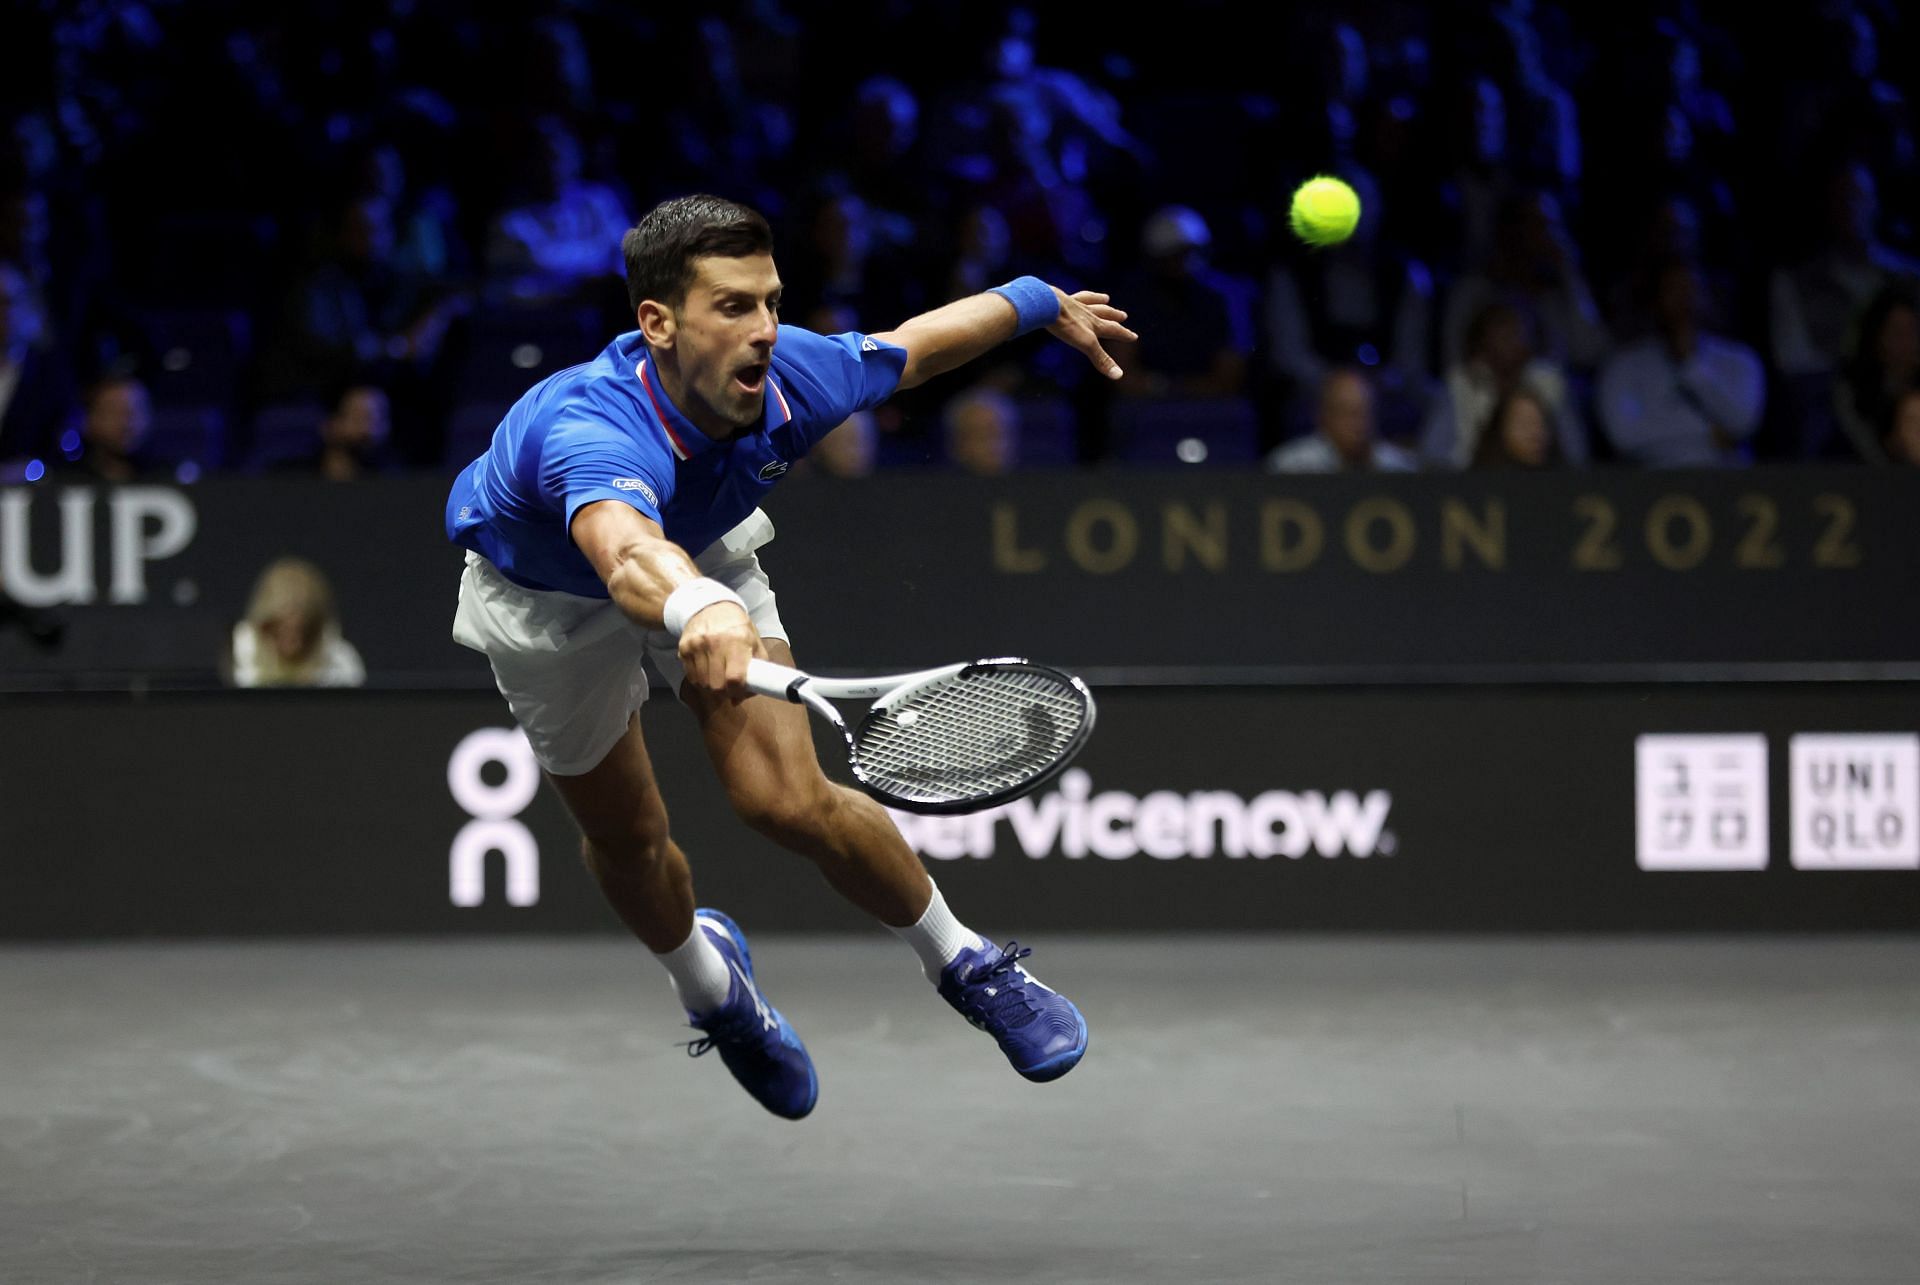 Djokovic in action at the Laver Cup